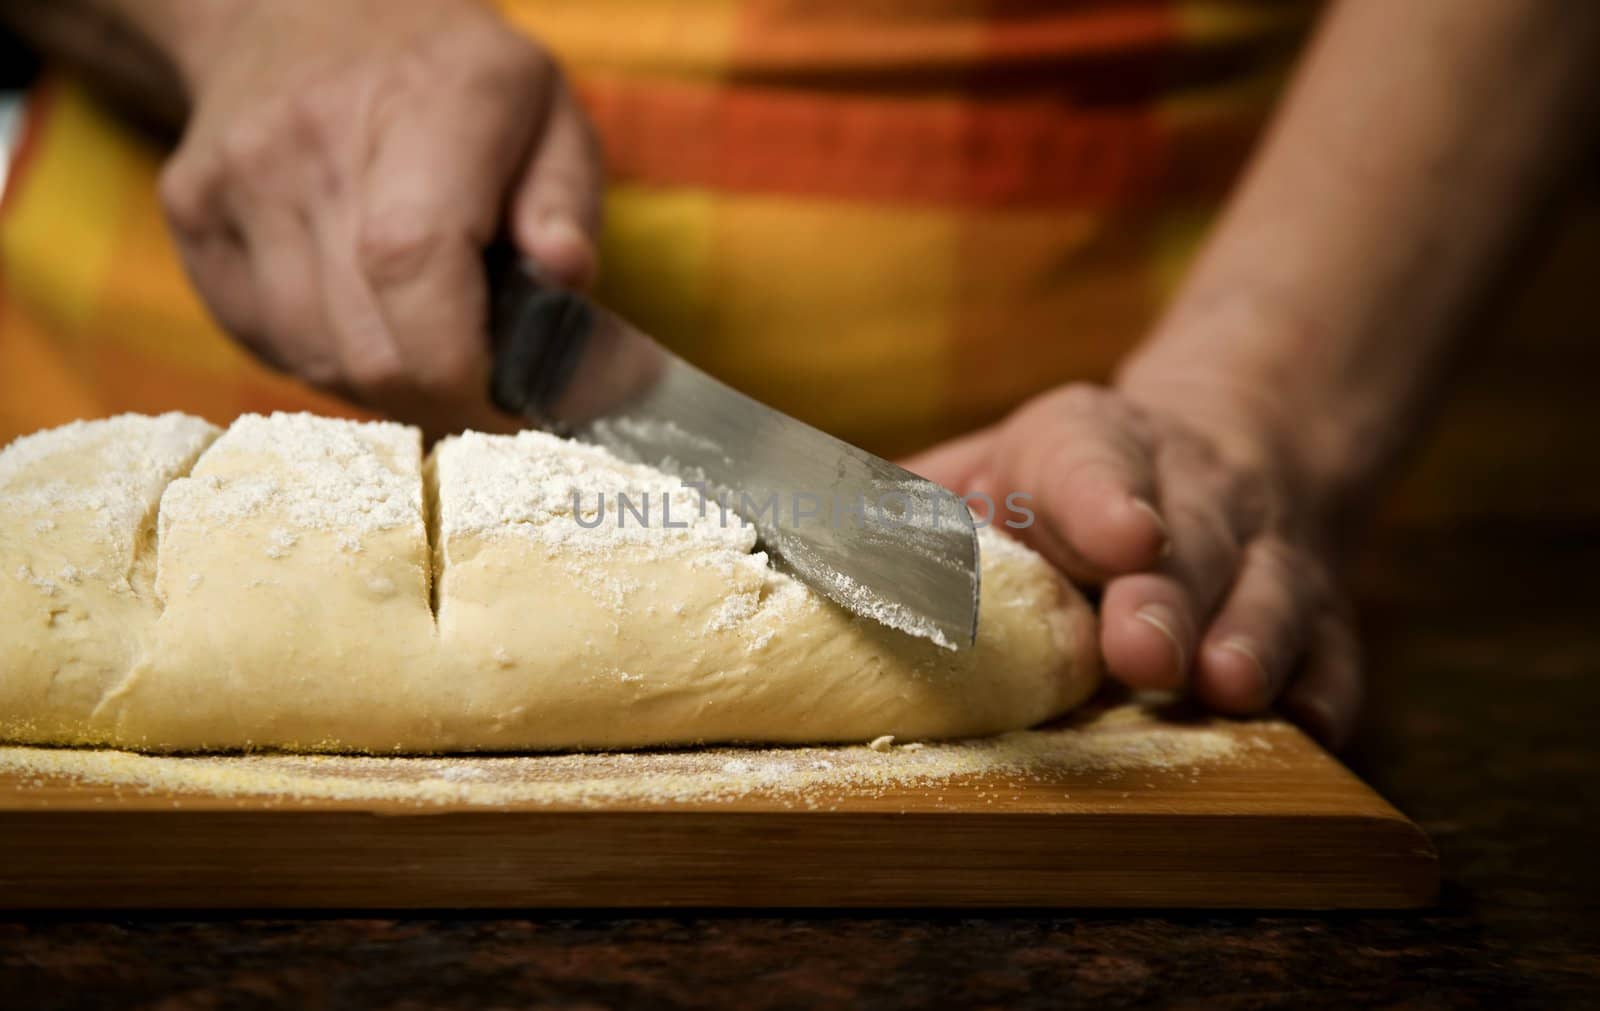 Adding cut to unbaked bread dough by Creatista